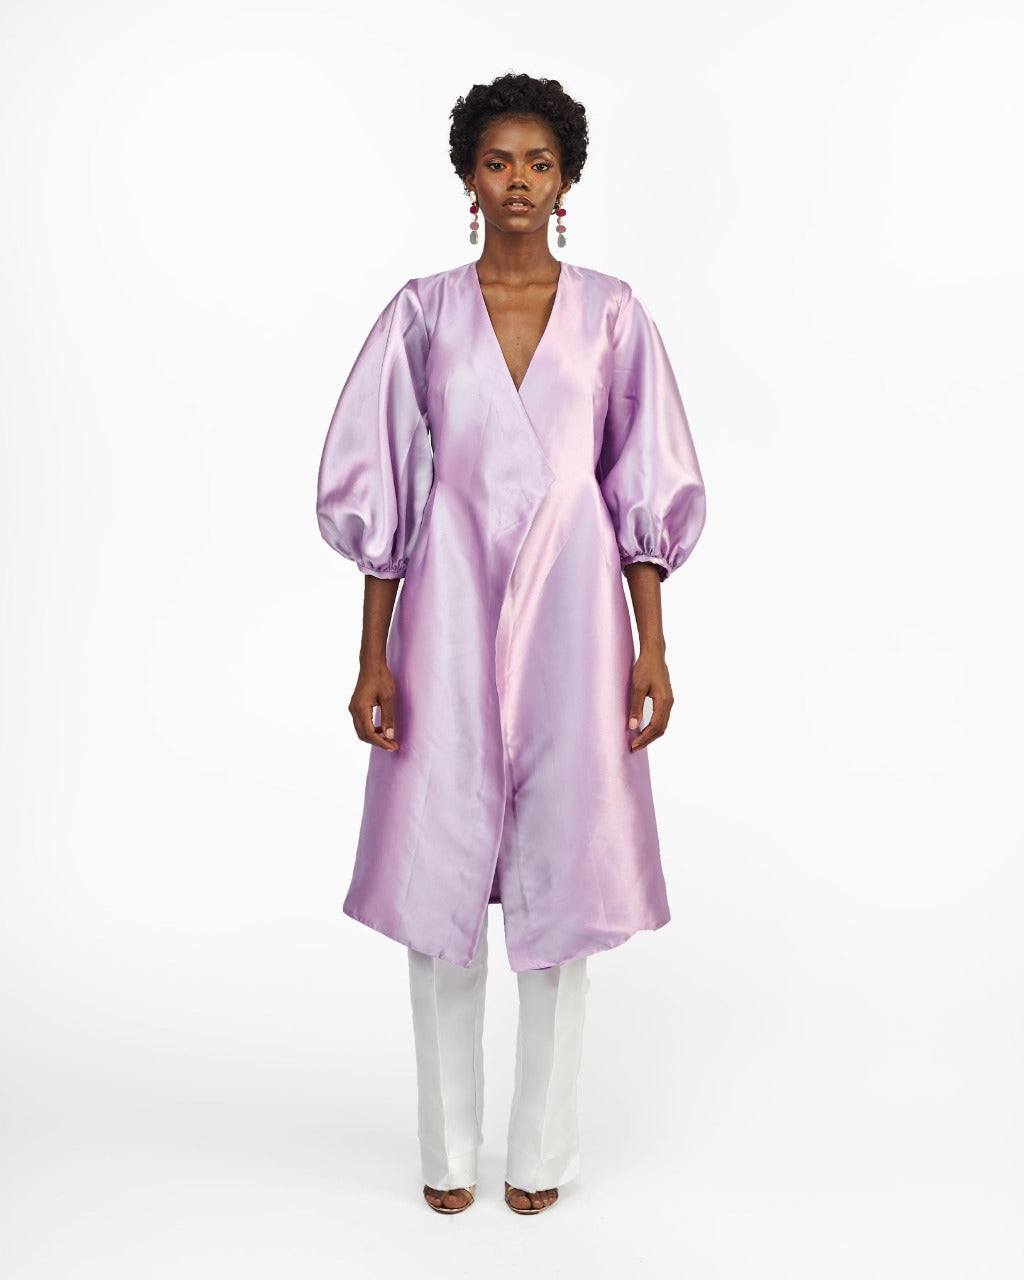 A model in a Lilac silk satin jacket with puff sleeve and a White straight-cut pant in a white room